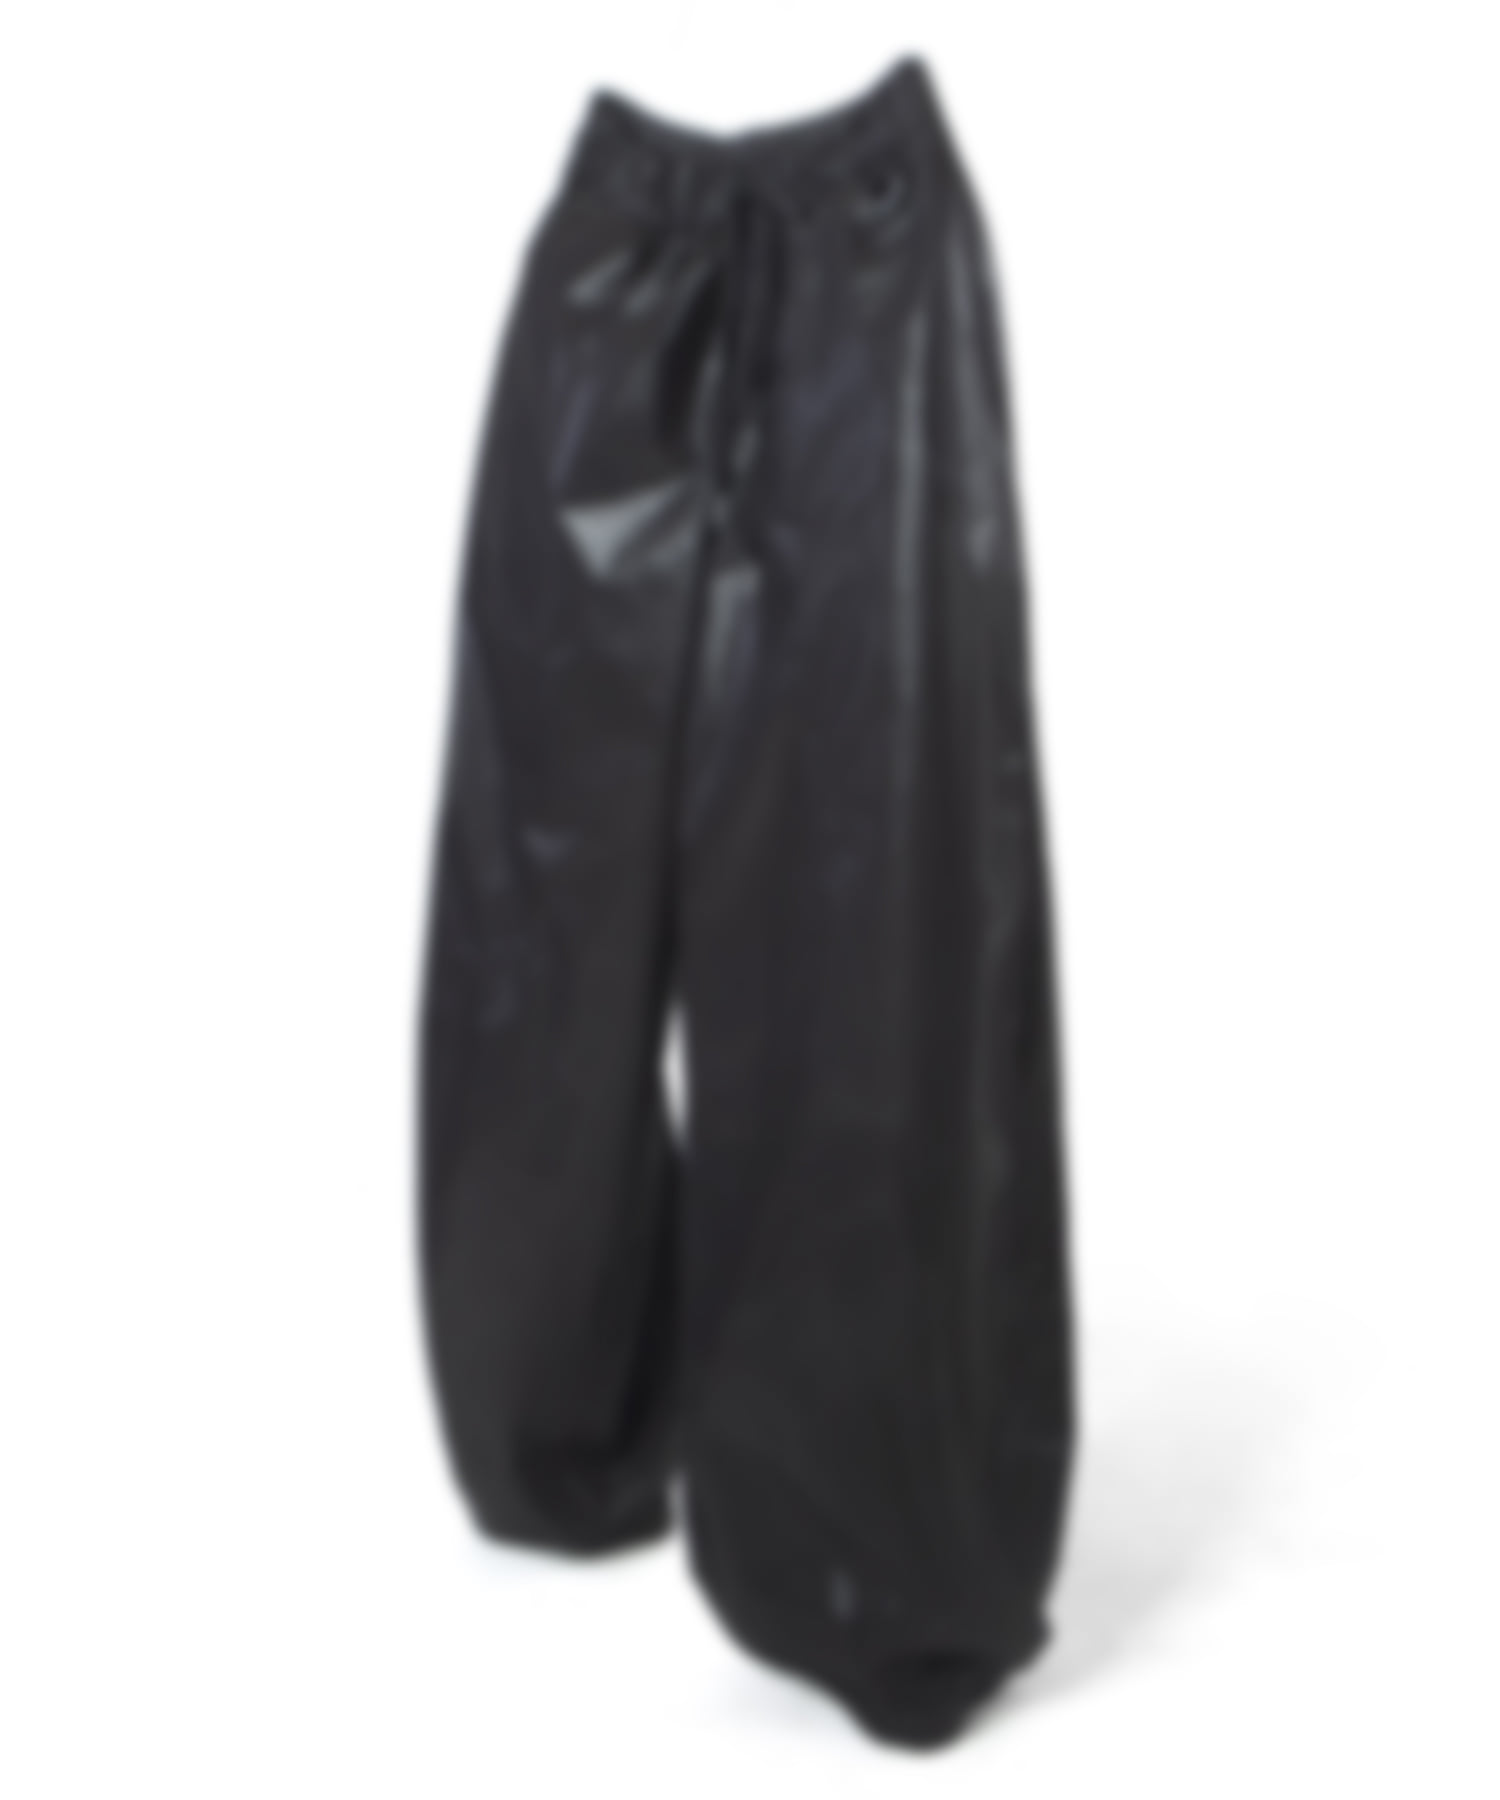 DP-024 (curved coating pants)